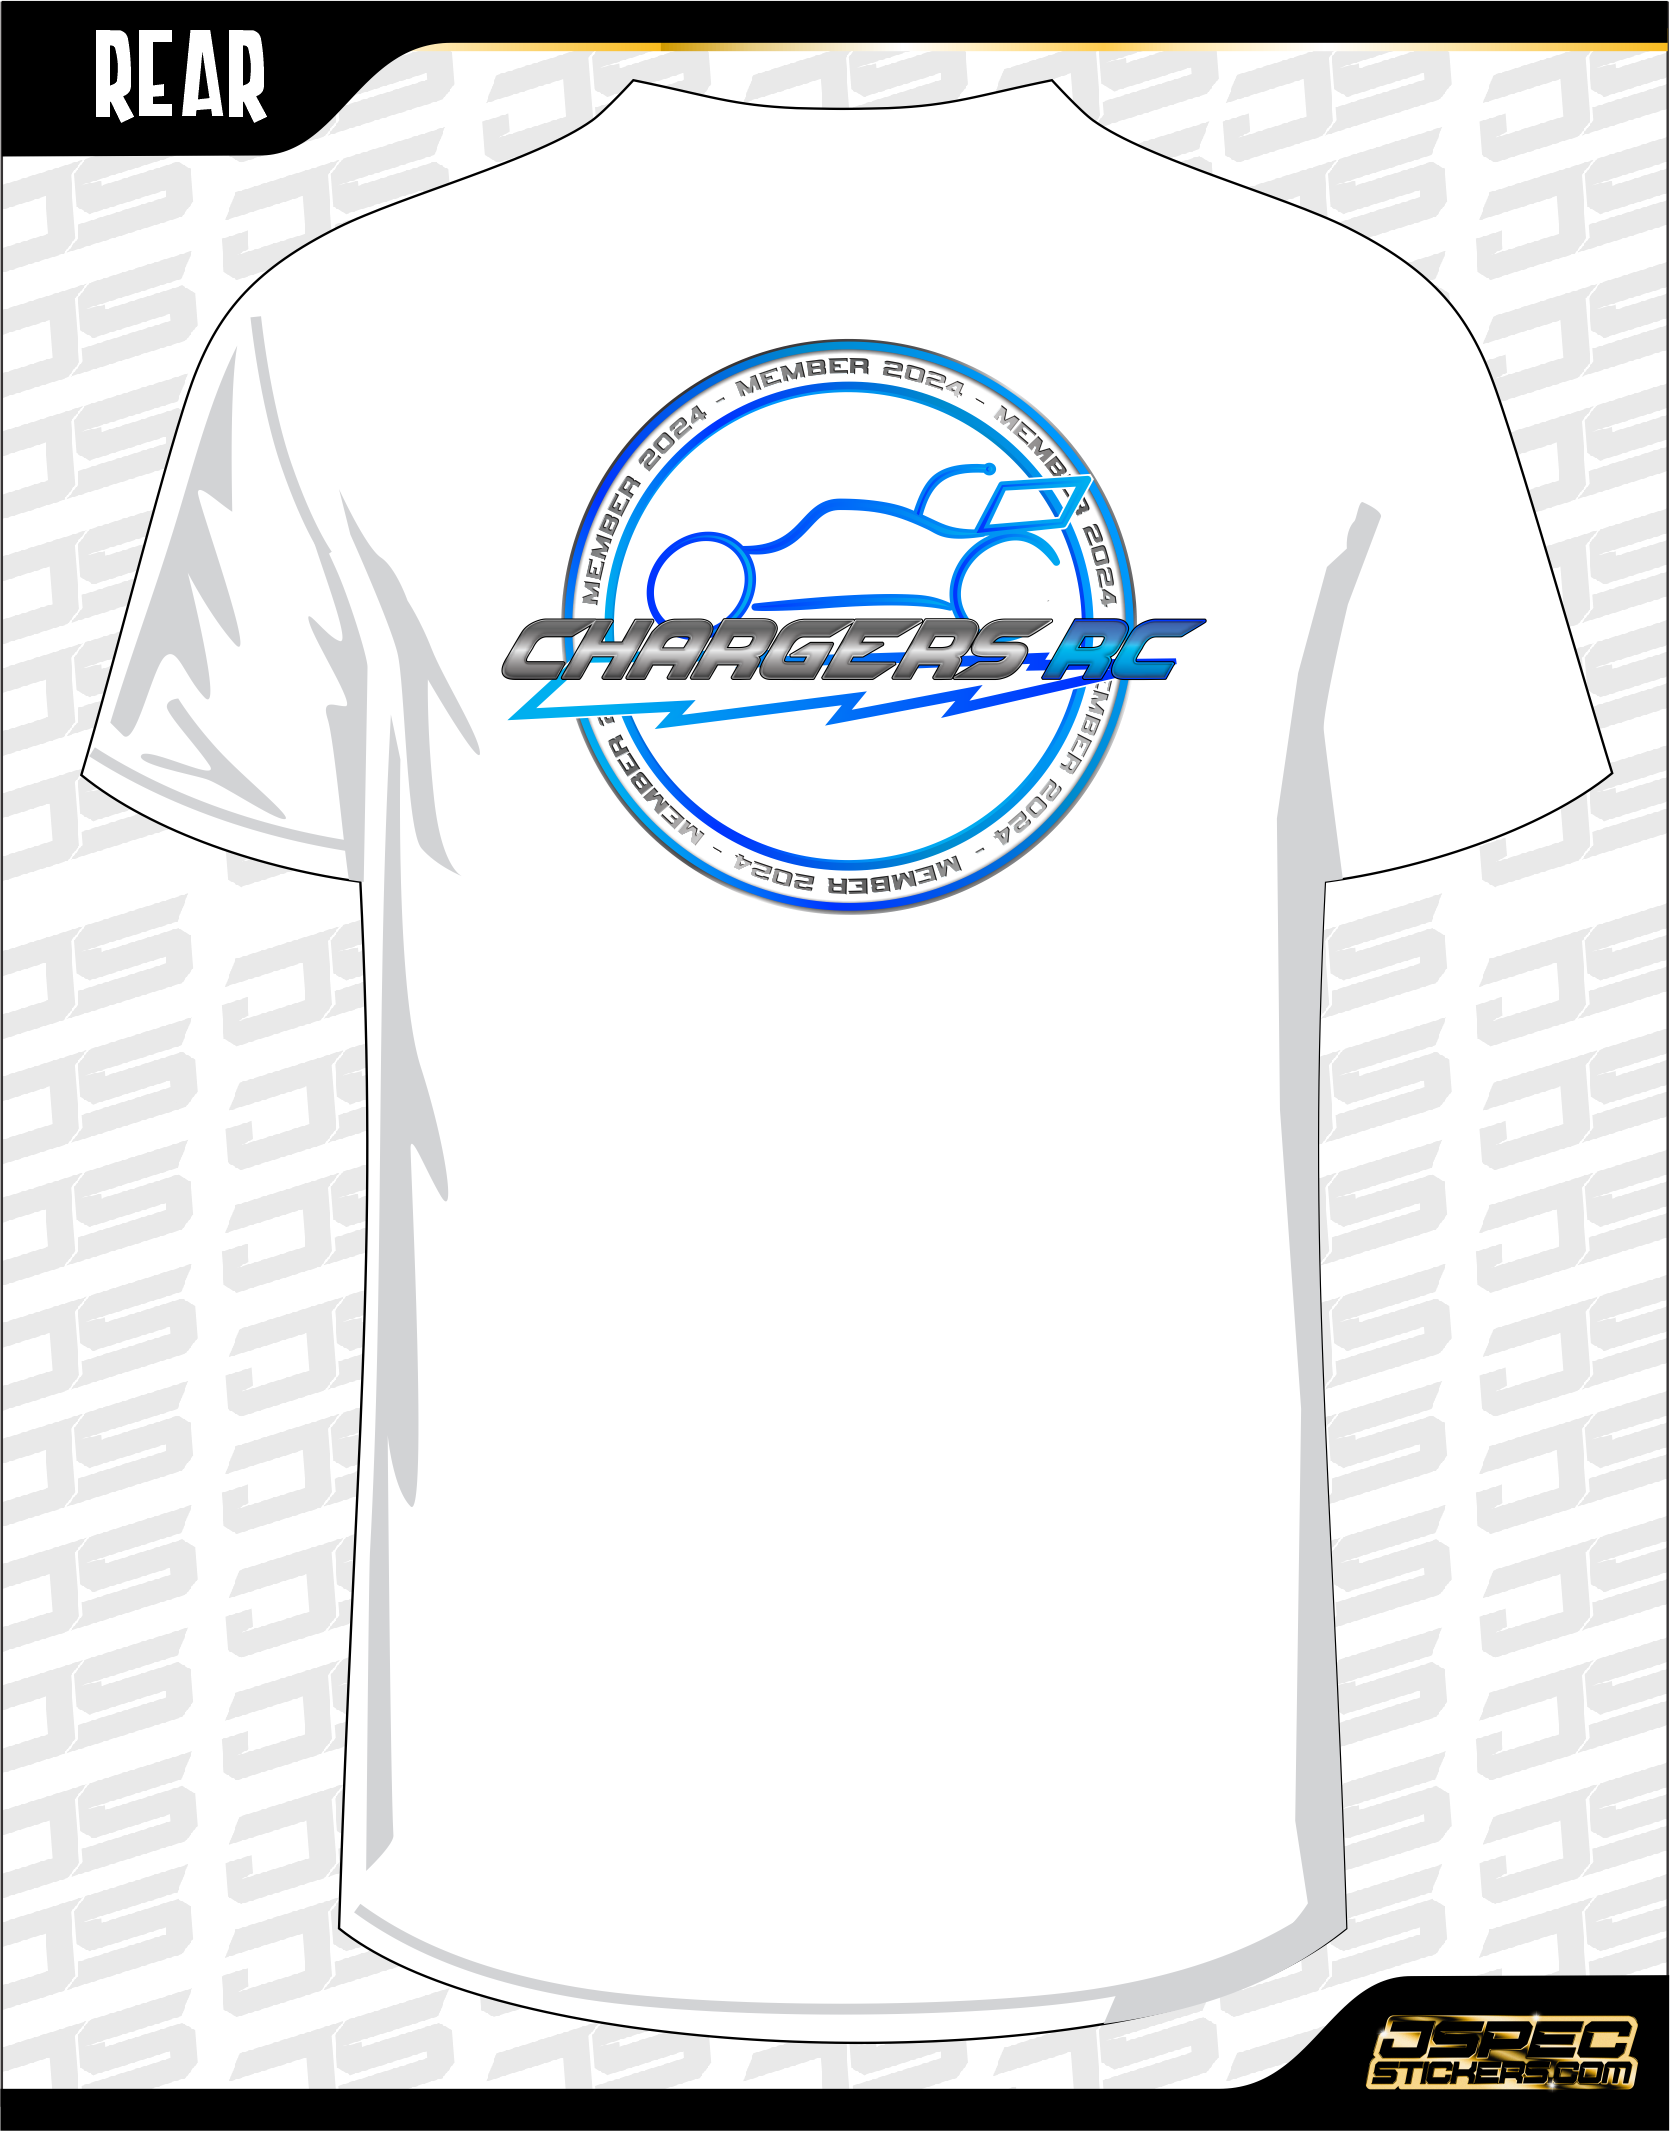 CHARGERS RC 2024 CLUB SHIRT (inc Race Number & Logos)